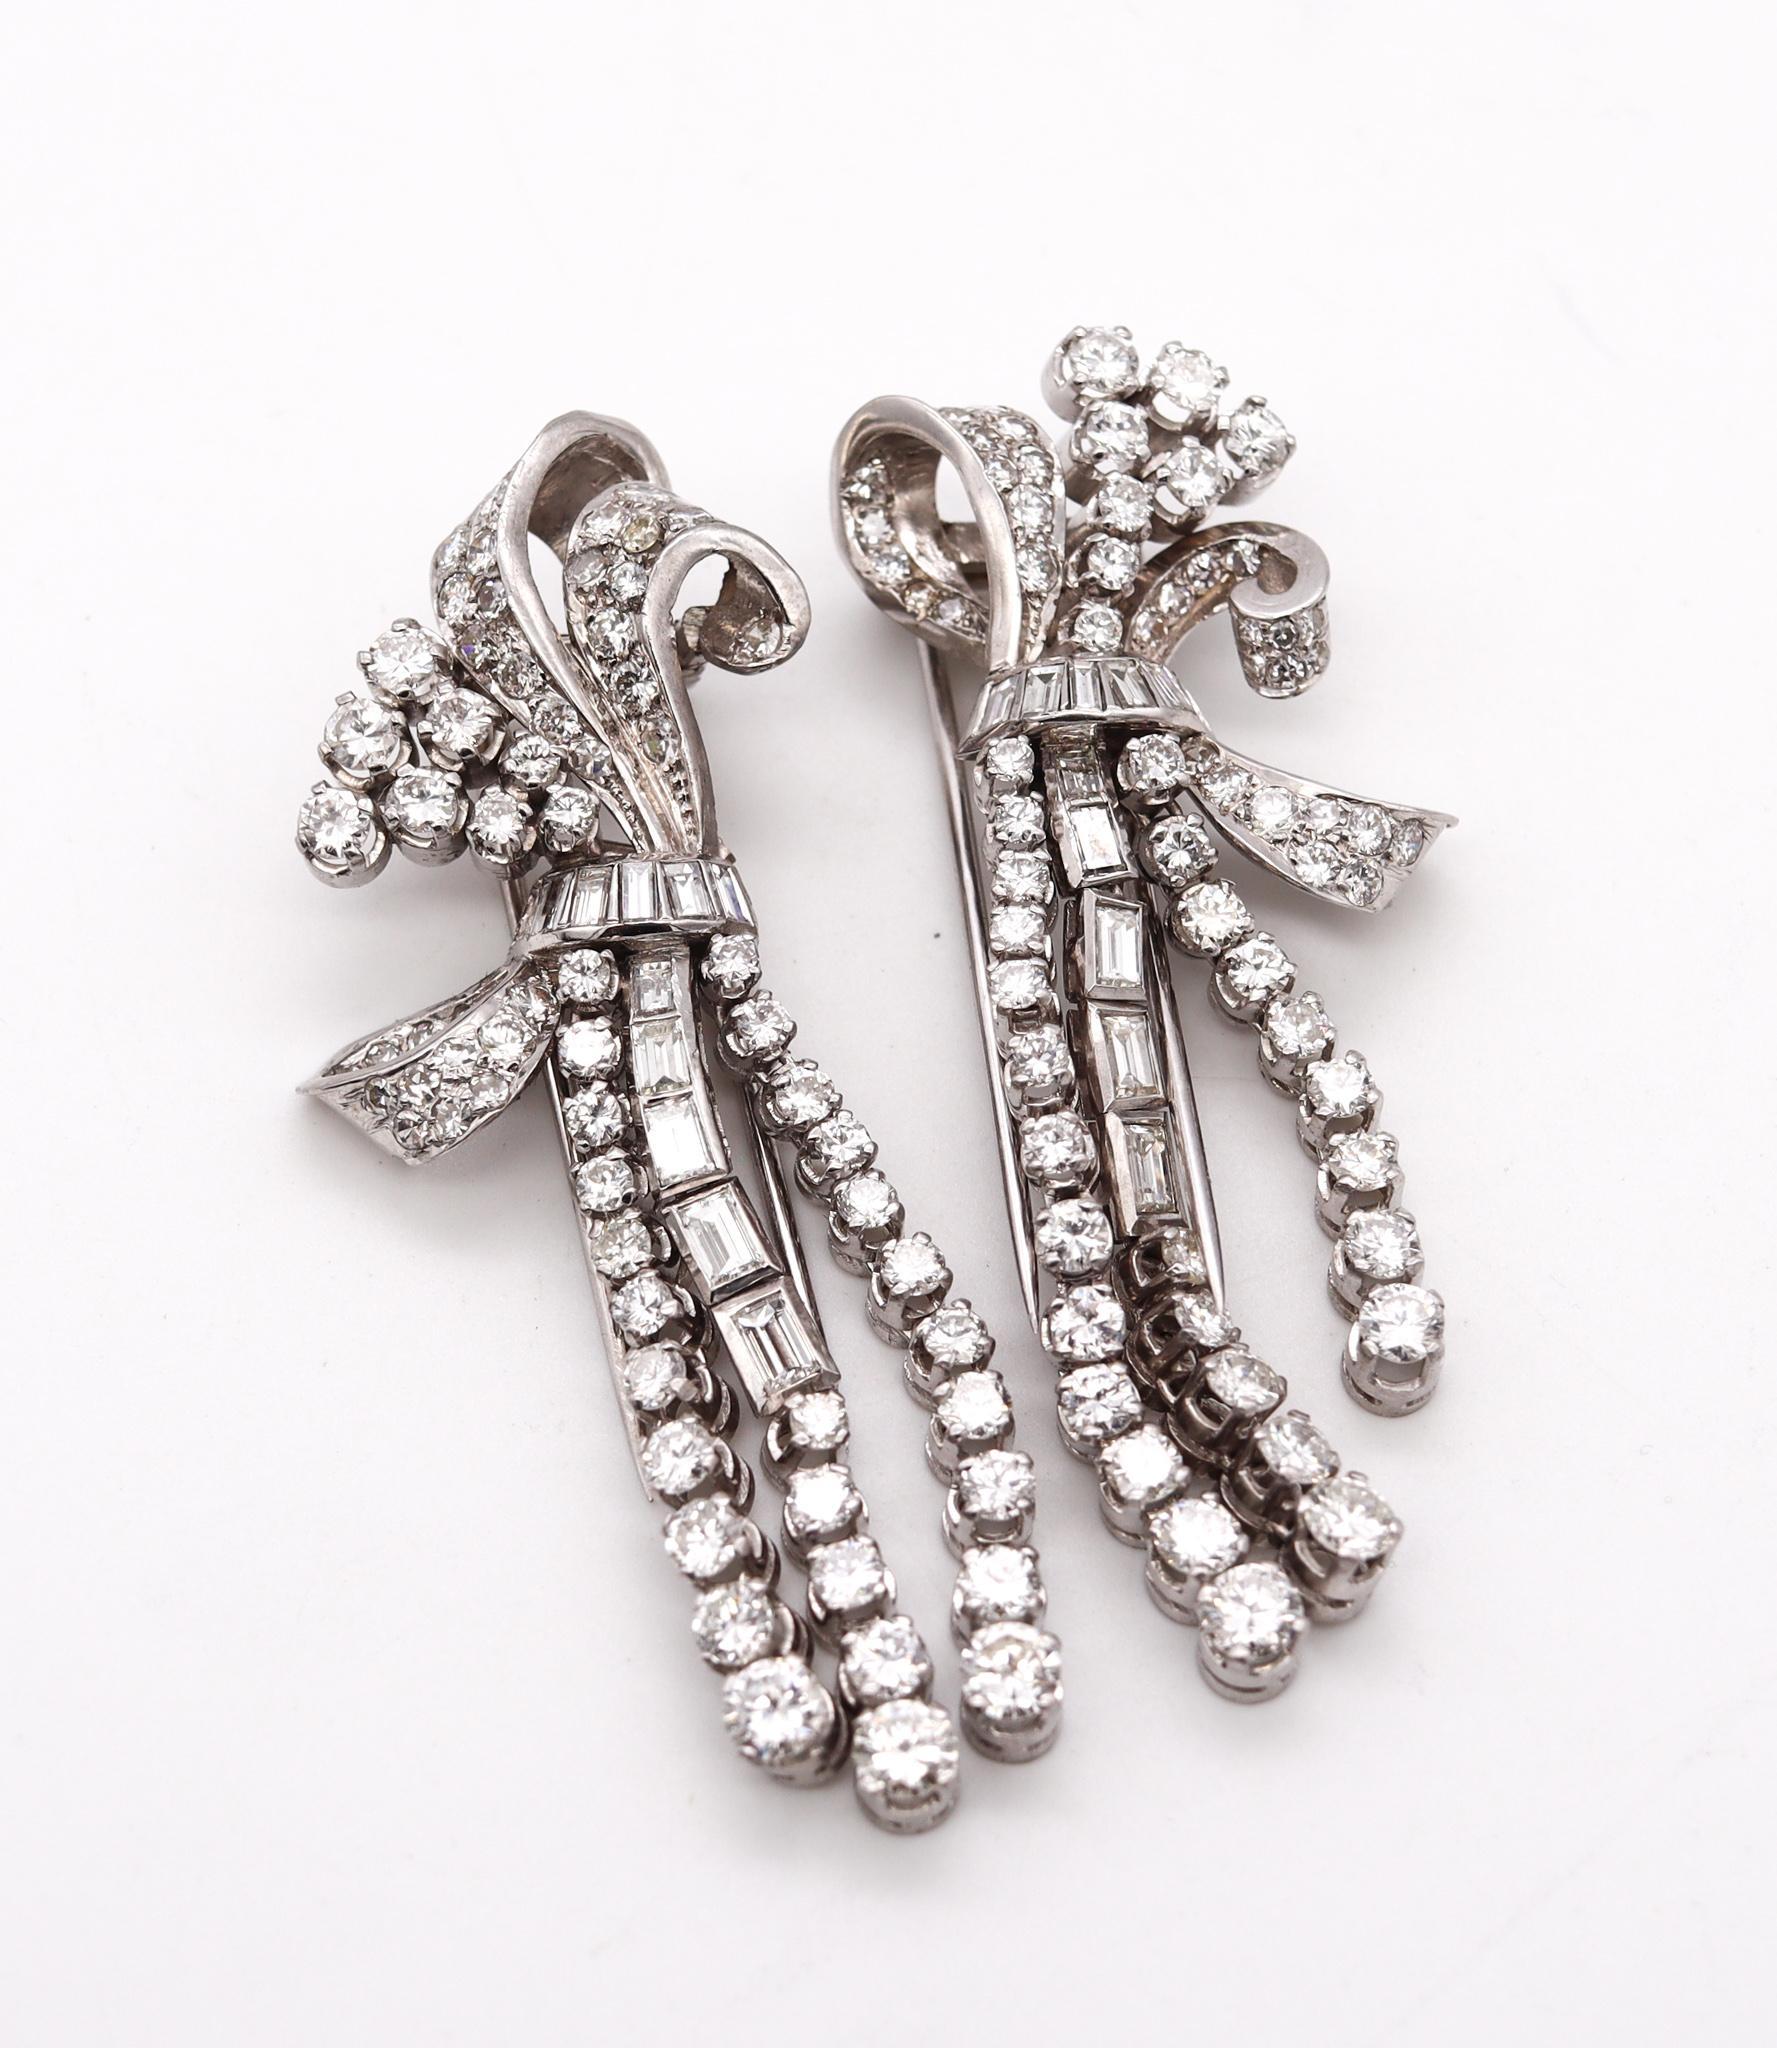 Art Deco 1930 Pair Of Clips Brooches In Platinum With 23.72 Cts Of VS Diamonds 1